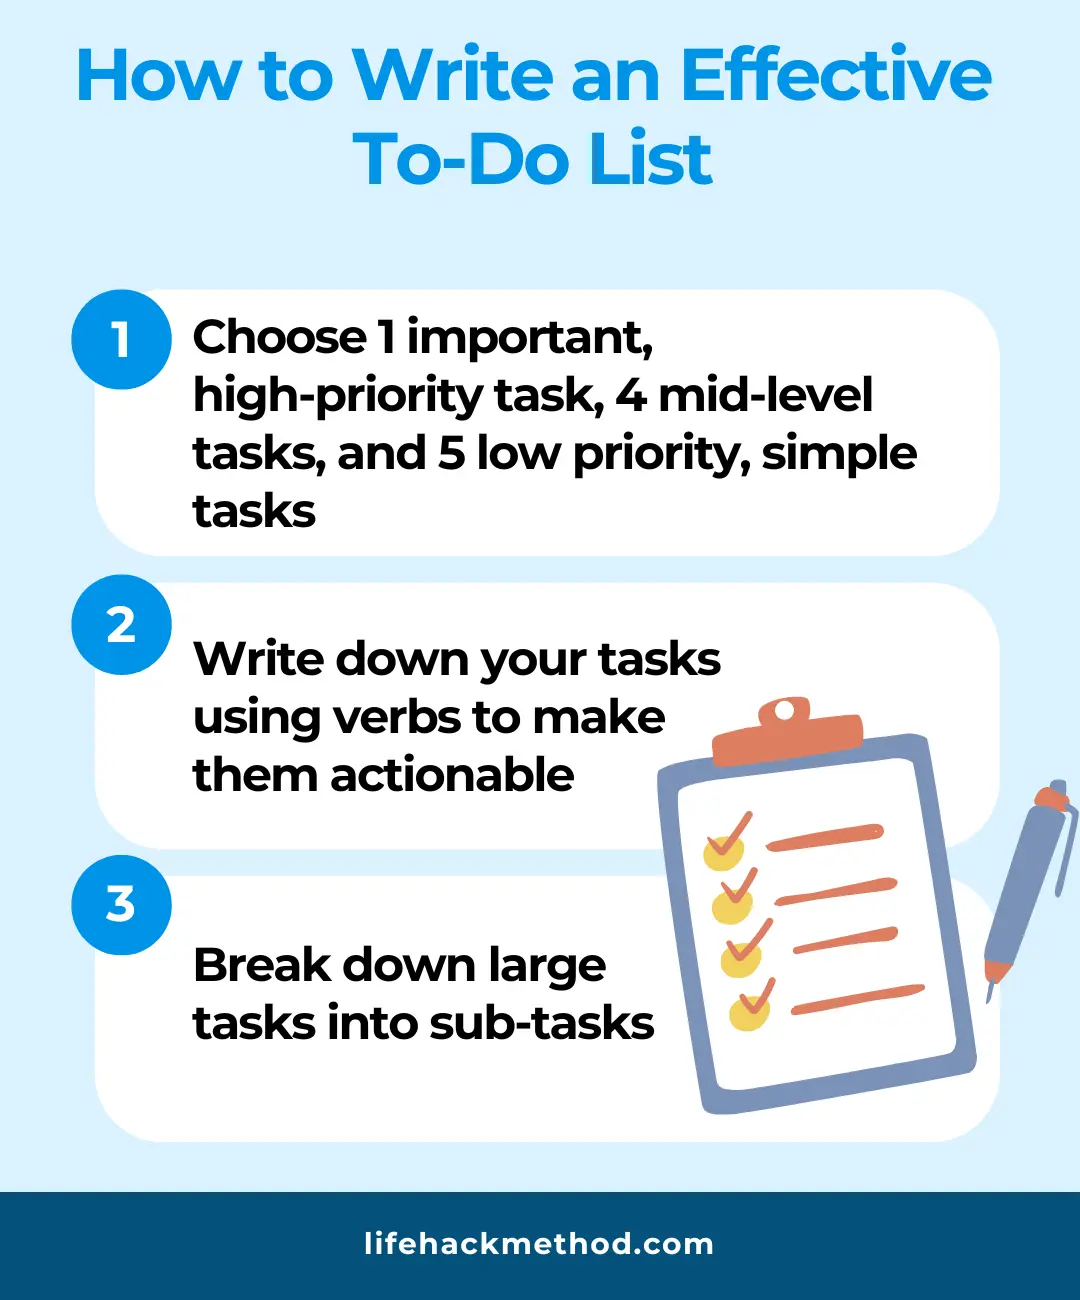 How to write effective to-do lists